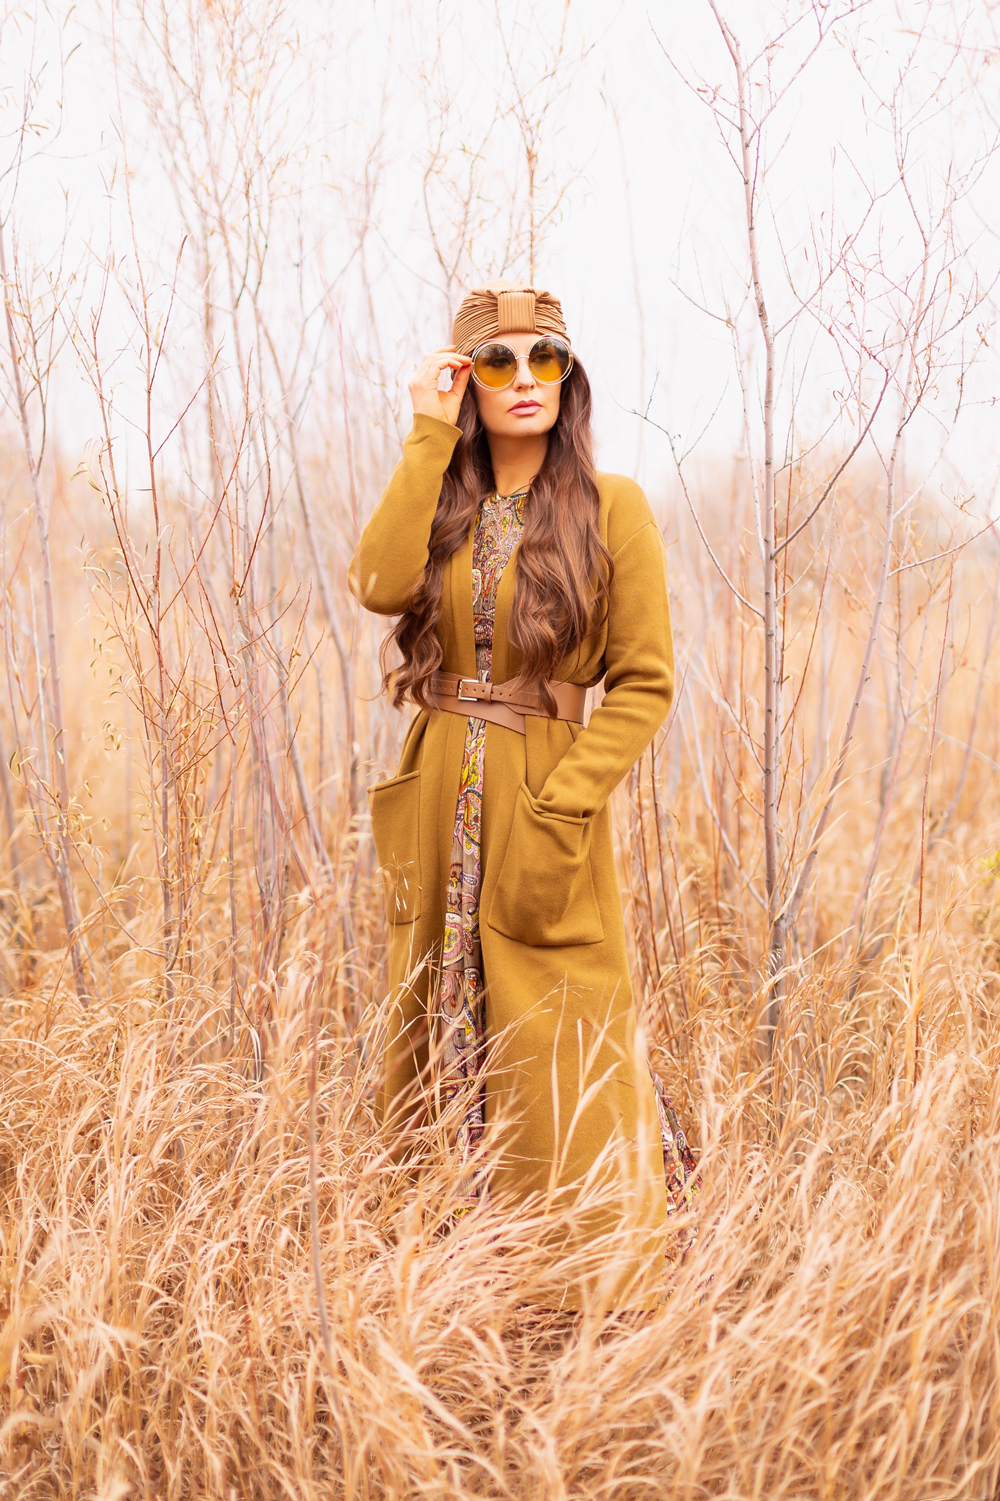 6 Luxe Bohemian Fall Outfits | Organic Olive | Brunette woman wearing an olive paisley maxi dress, longline olive green cardigan, taupe corset belt, exotic taupe hat an oversized round olive sunglasses amongst wild fall grasses in a willow grove | Boho Fall 2022 Outfit Ideas | Feminine Bohemian Style | Polished Bohemian Style | Elegant Bohemian Style | Bohemian Outfit Ideas | How to Style a Paisley Maxi Dress for Fall | Calgary Alberta Fashion Blogger // JustineCelina.com